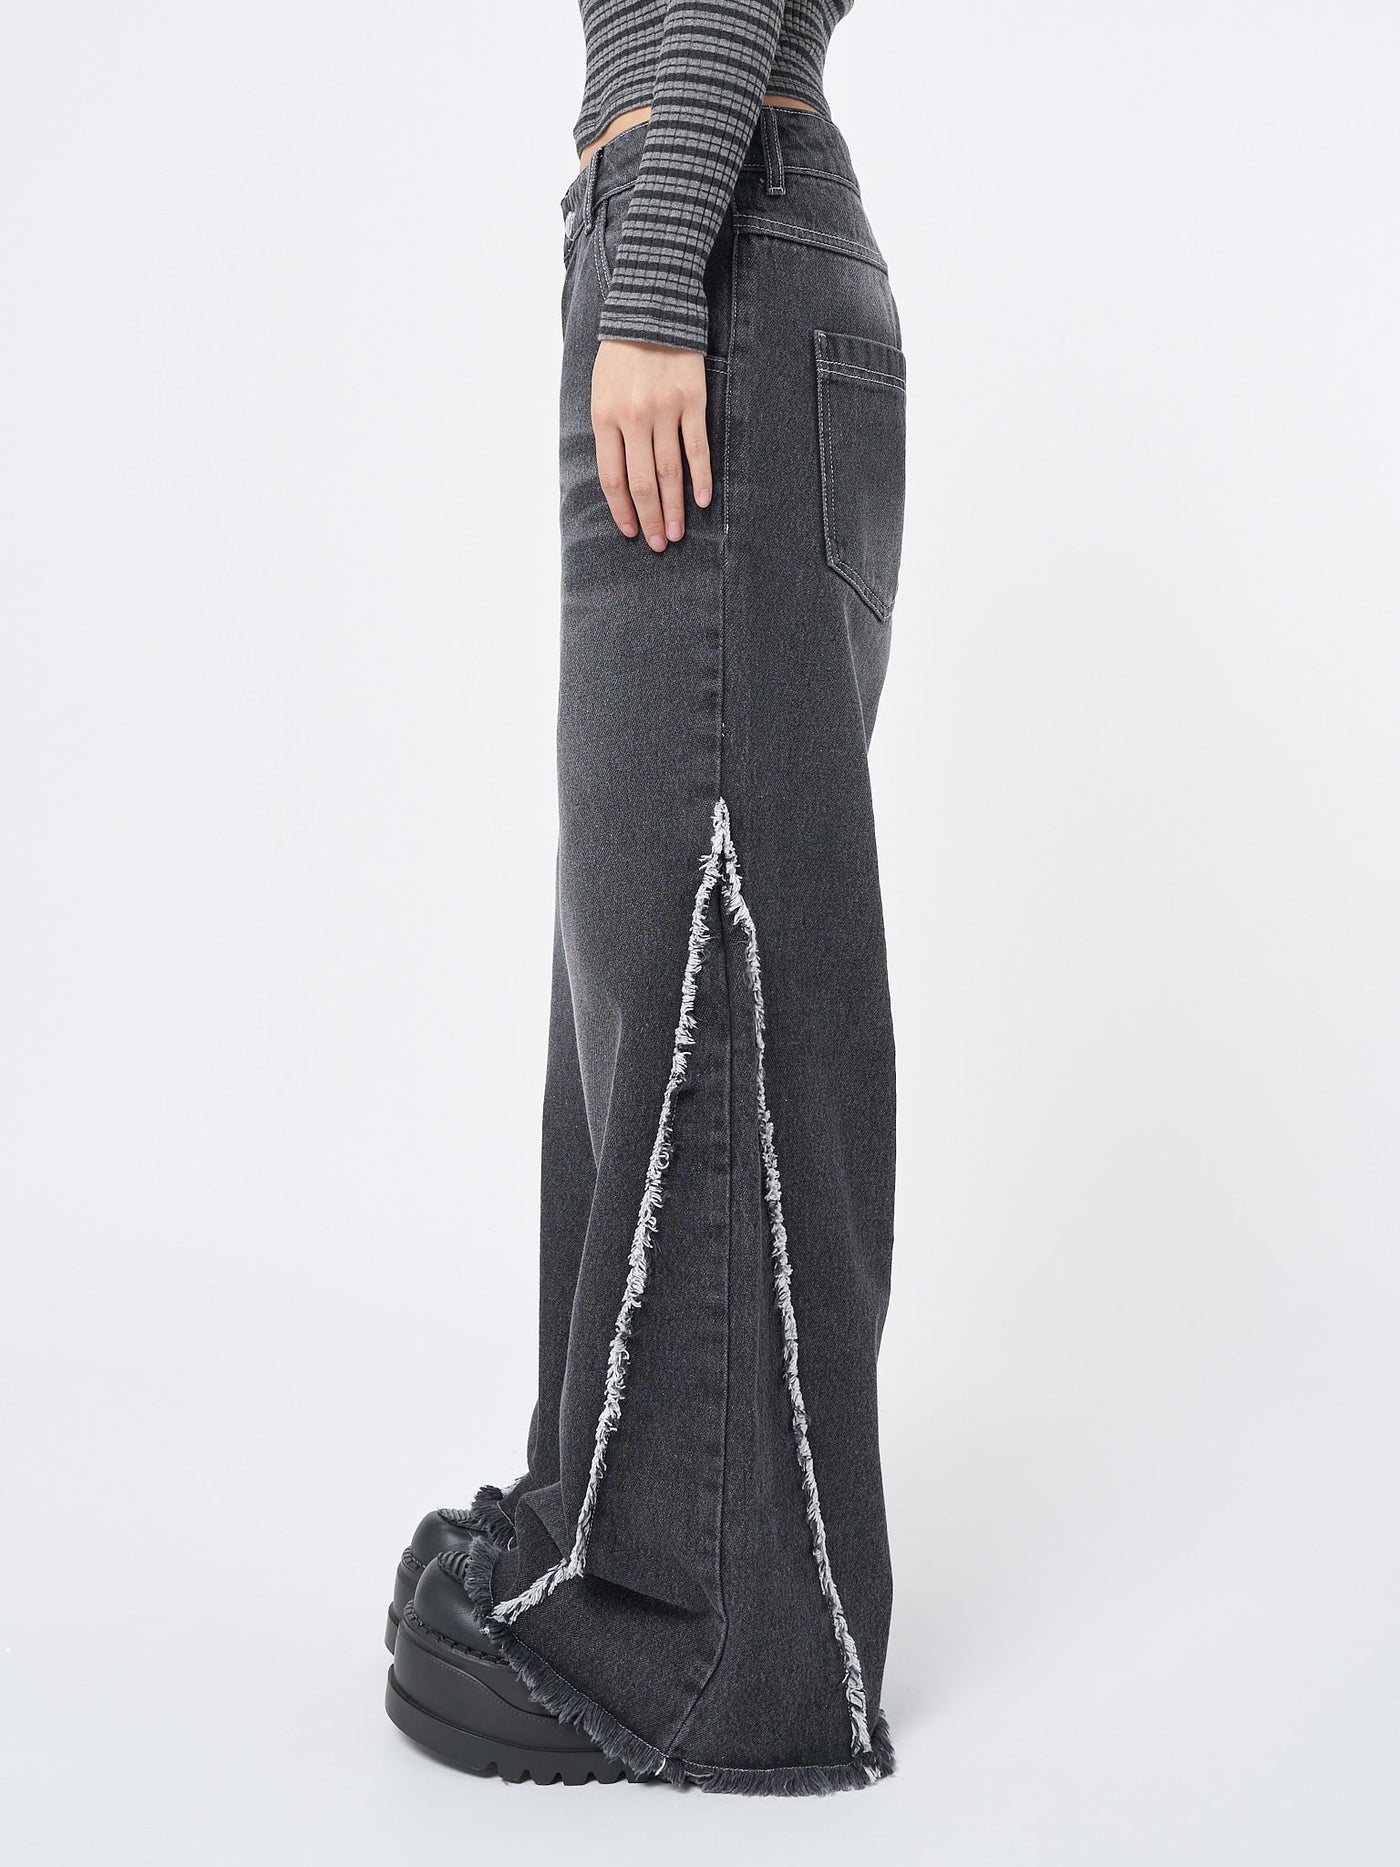 Wide leg jeans in washed black with contrast stitching in white and distressed side details